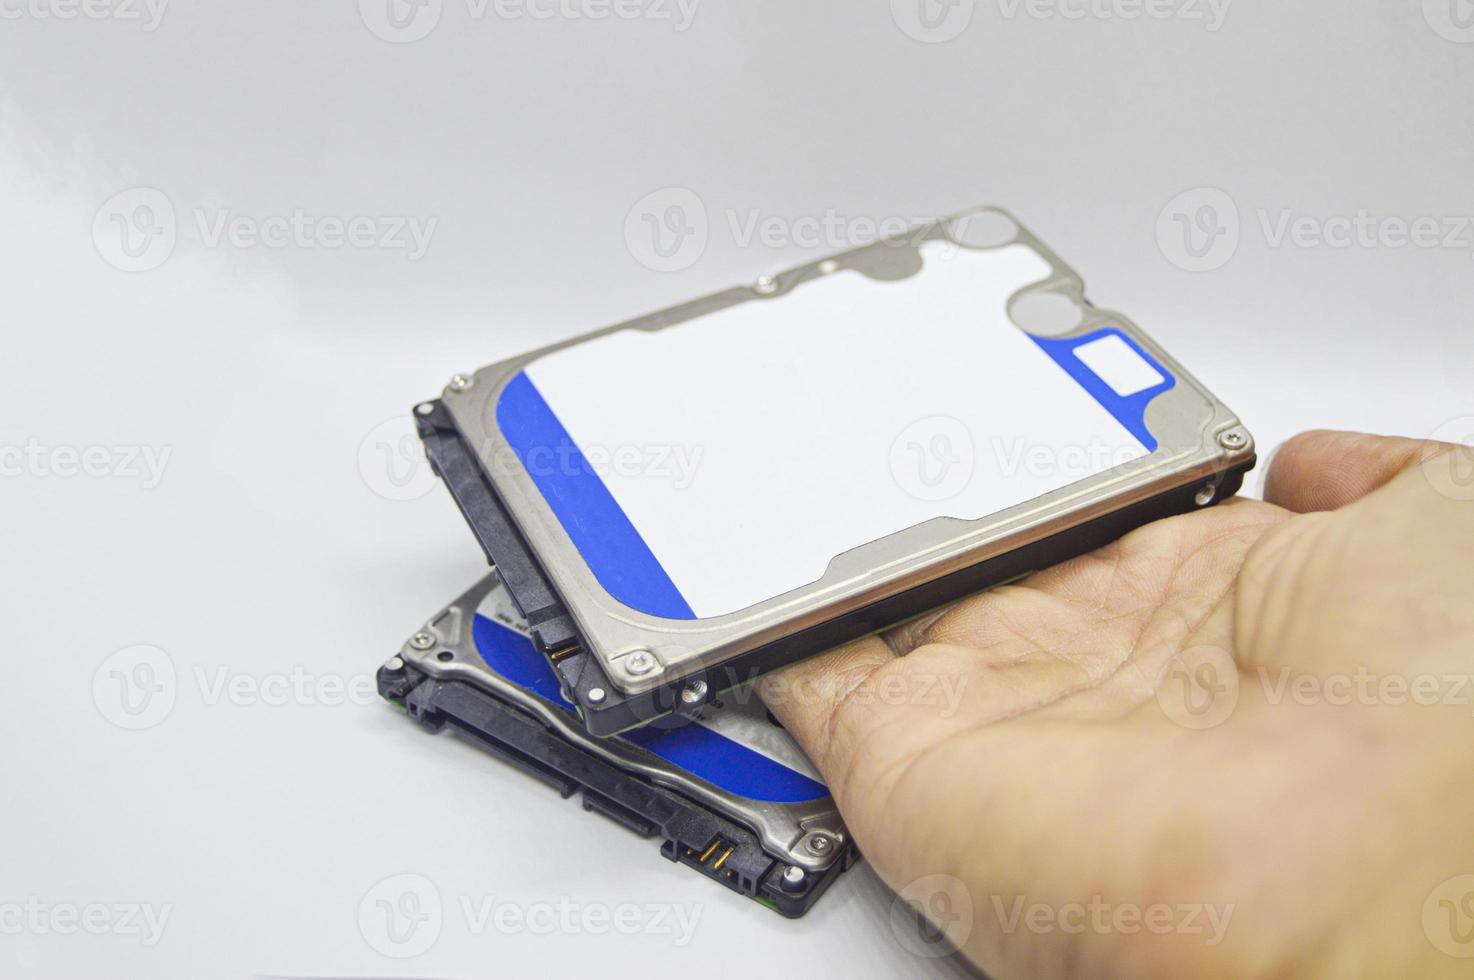 hard drive placed on a white background photo